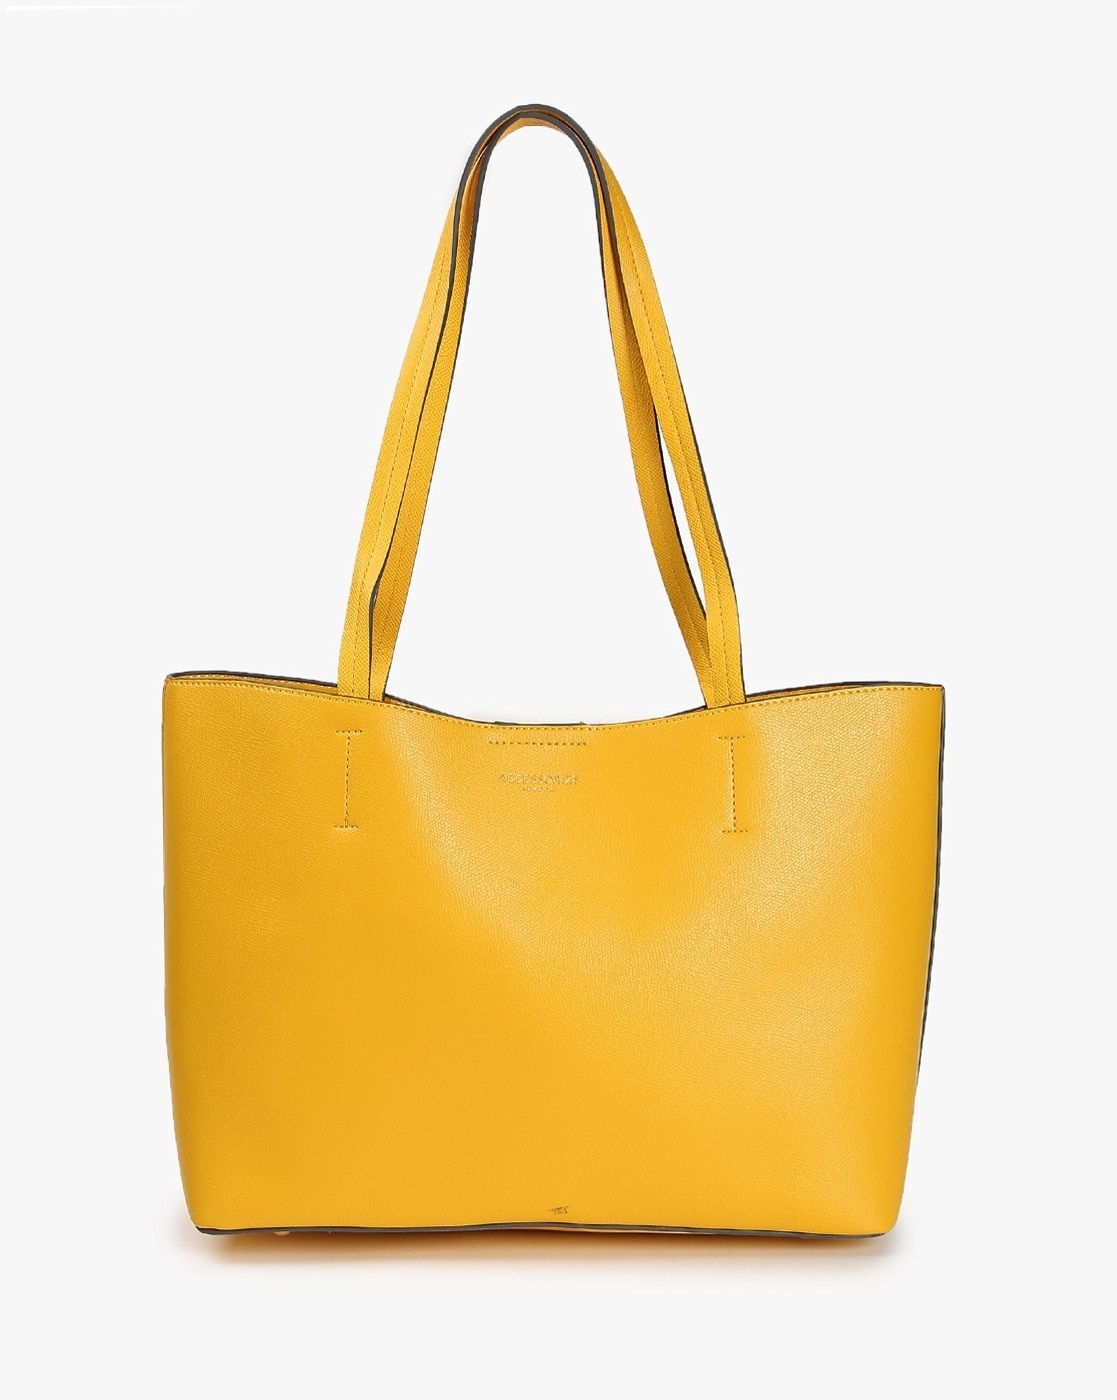 We offer economical yellow cotton tote bag with personal print